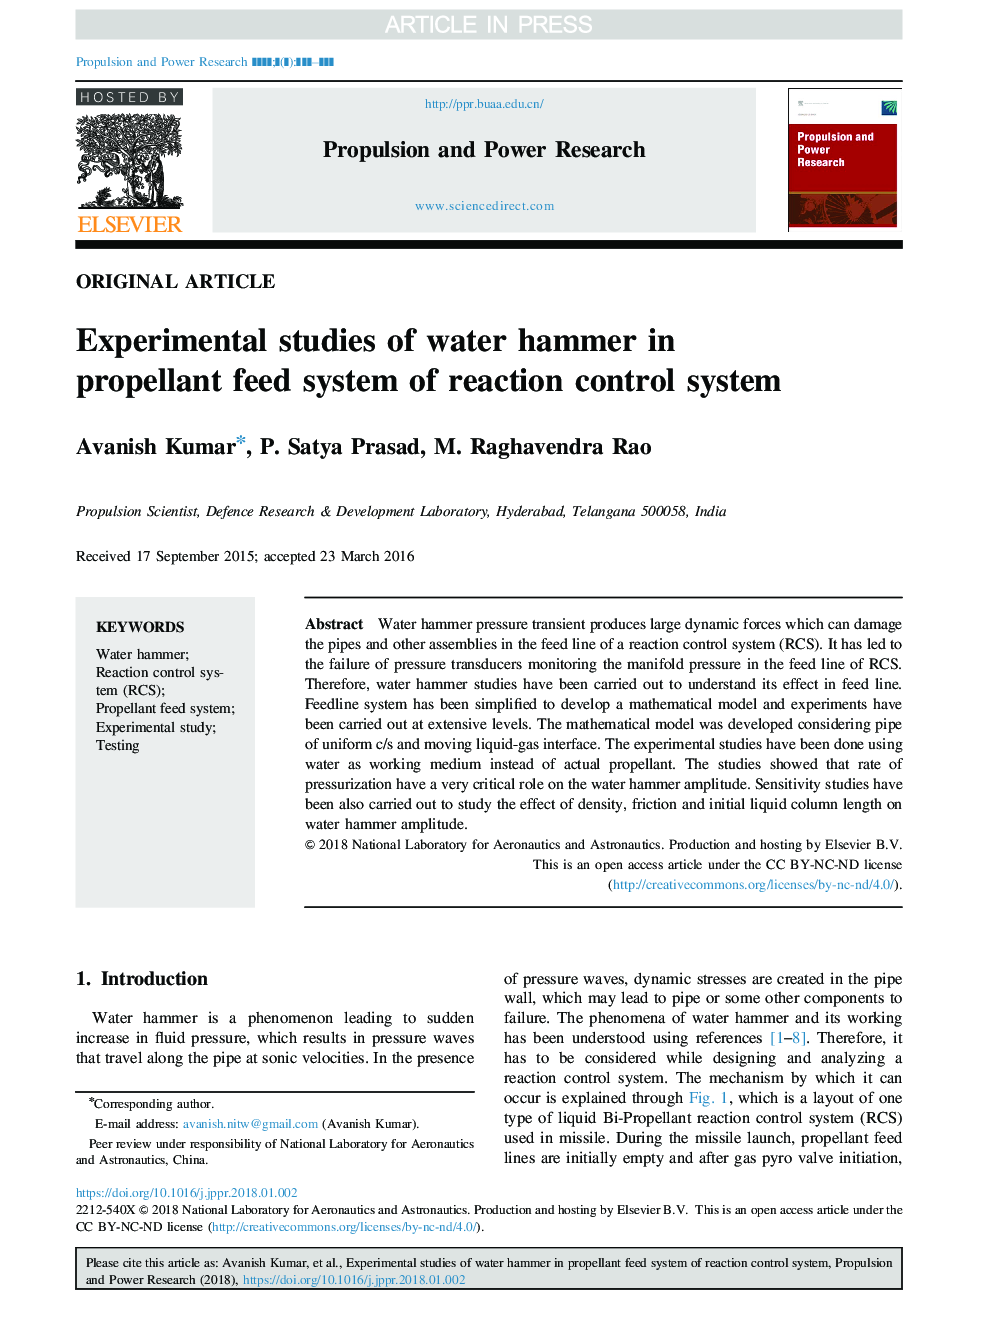 Experimental studies of water hammer in propellant feed system of reaction control system